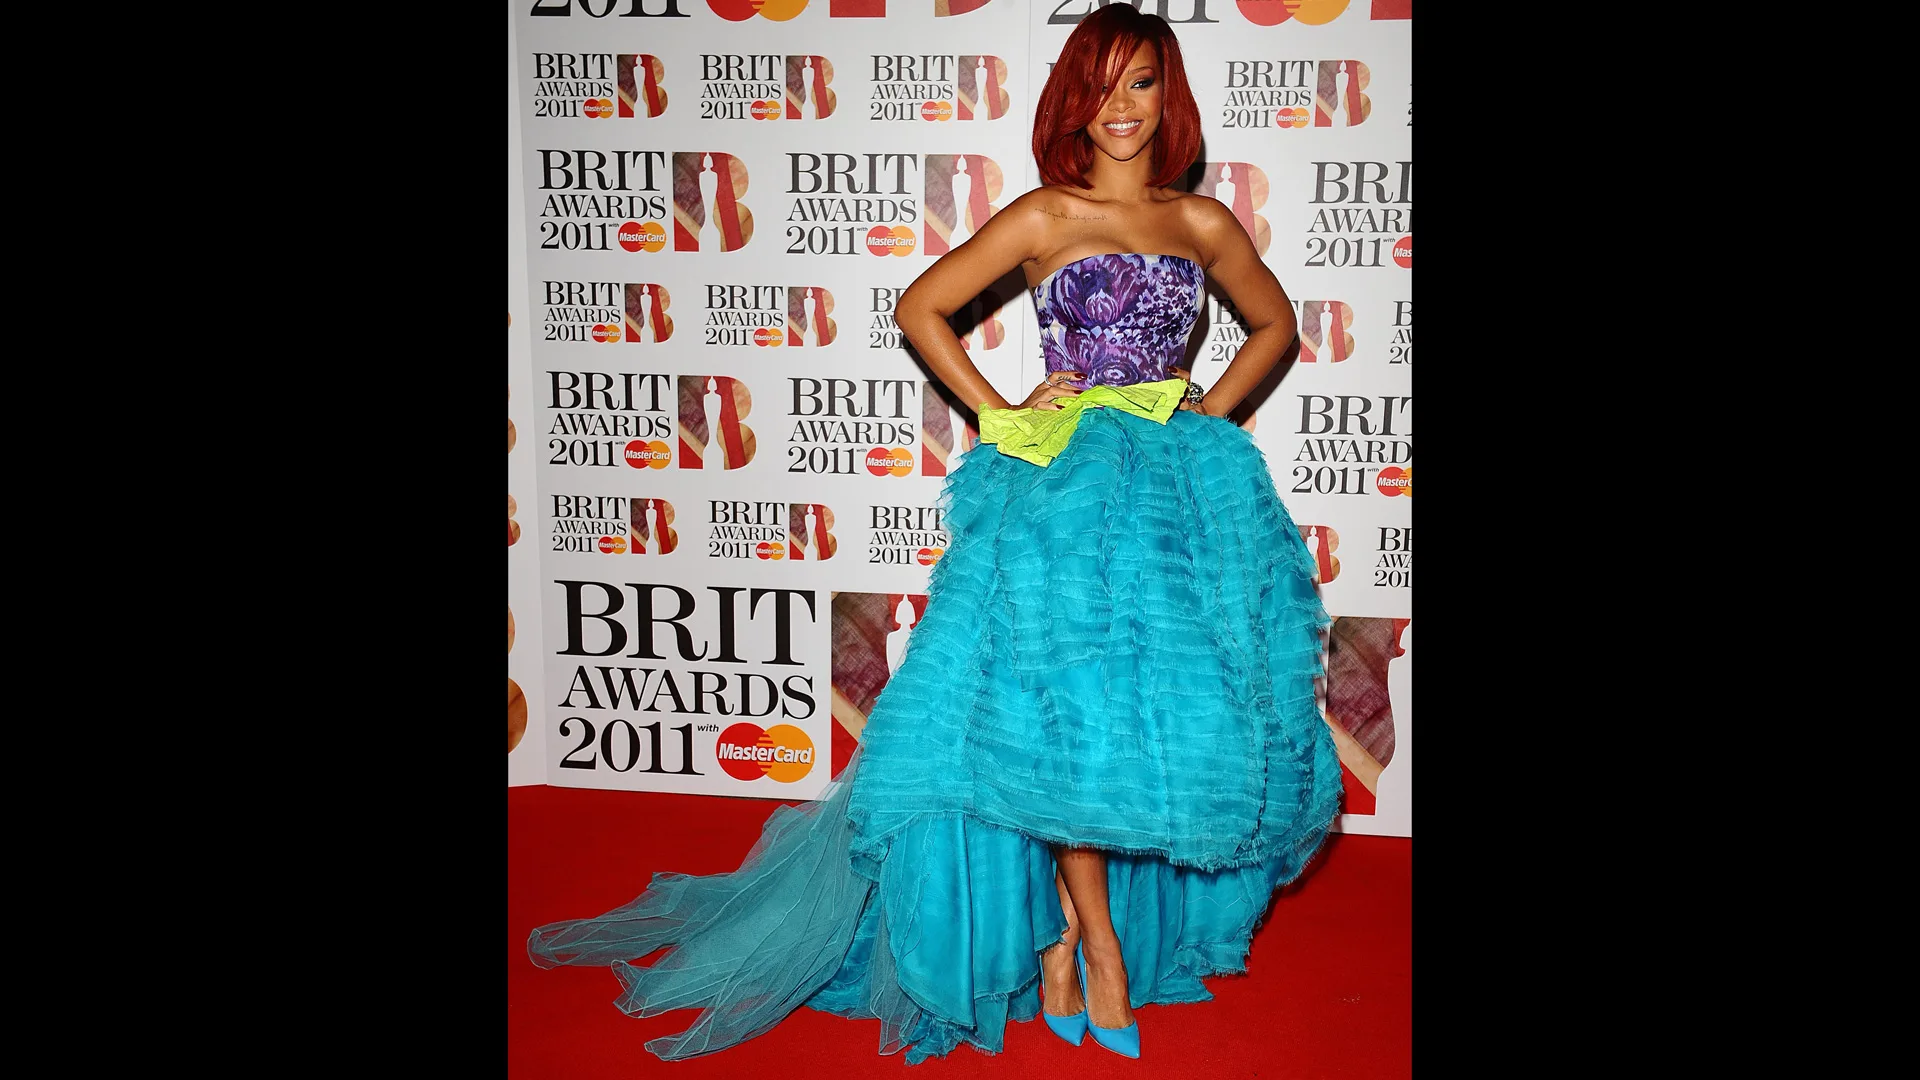 Photograph of Rihanna wearing a turquoise ballgown on the red carpt at the BRIT awards